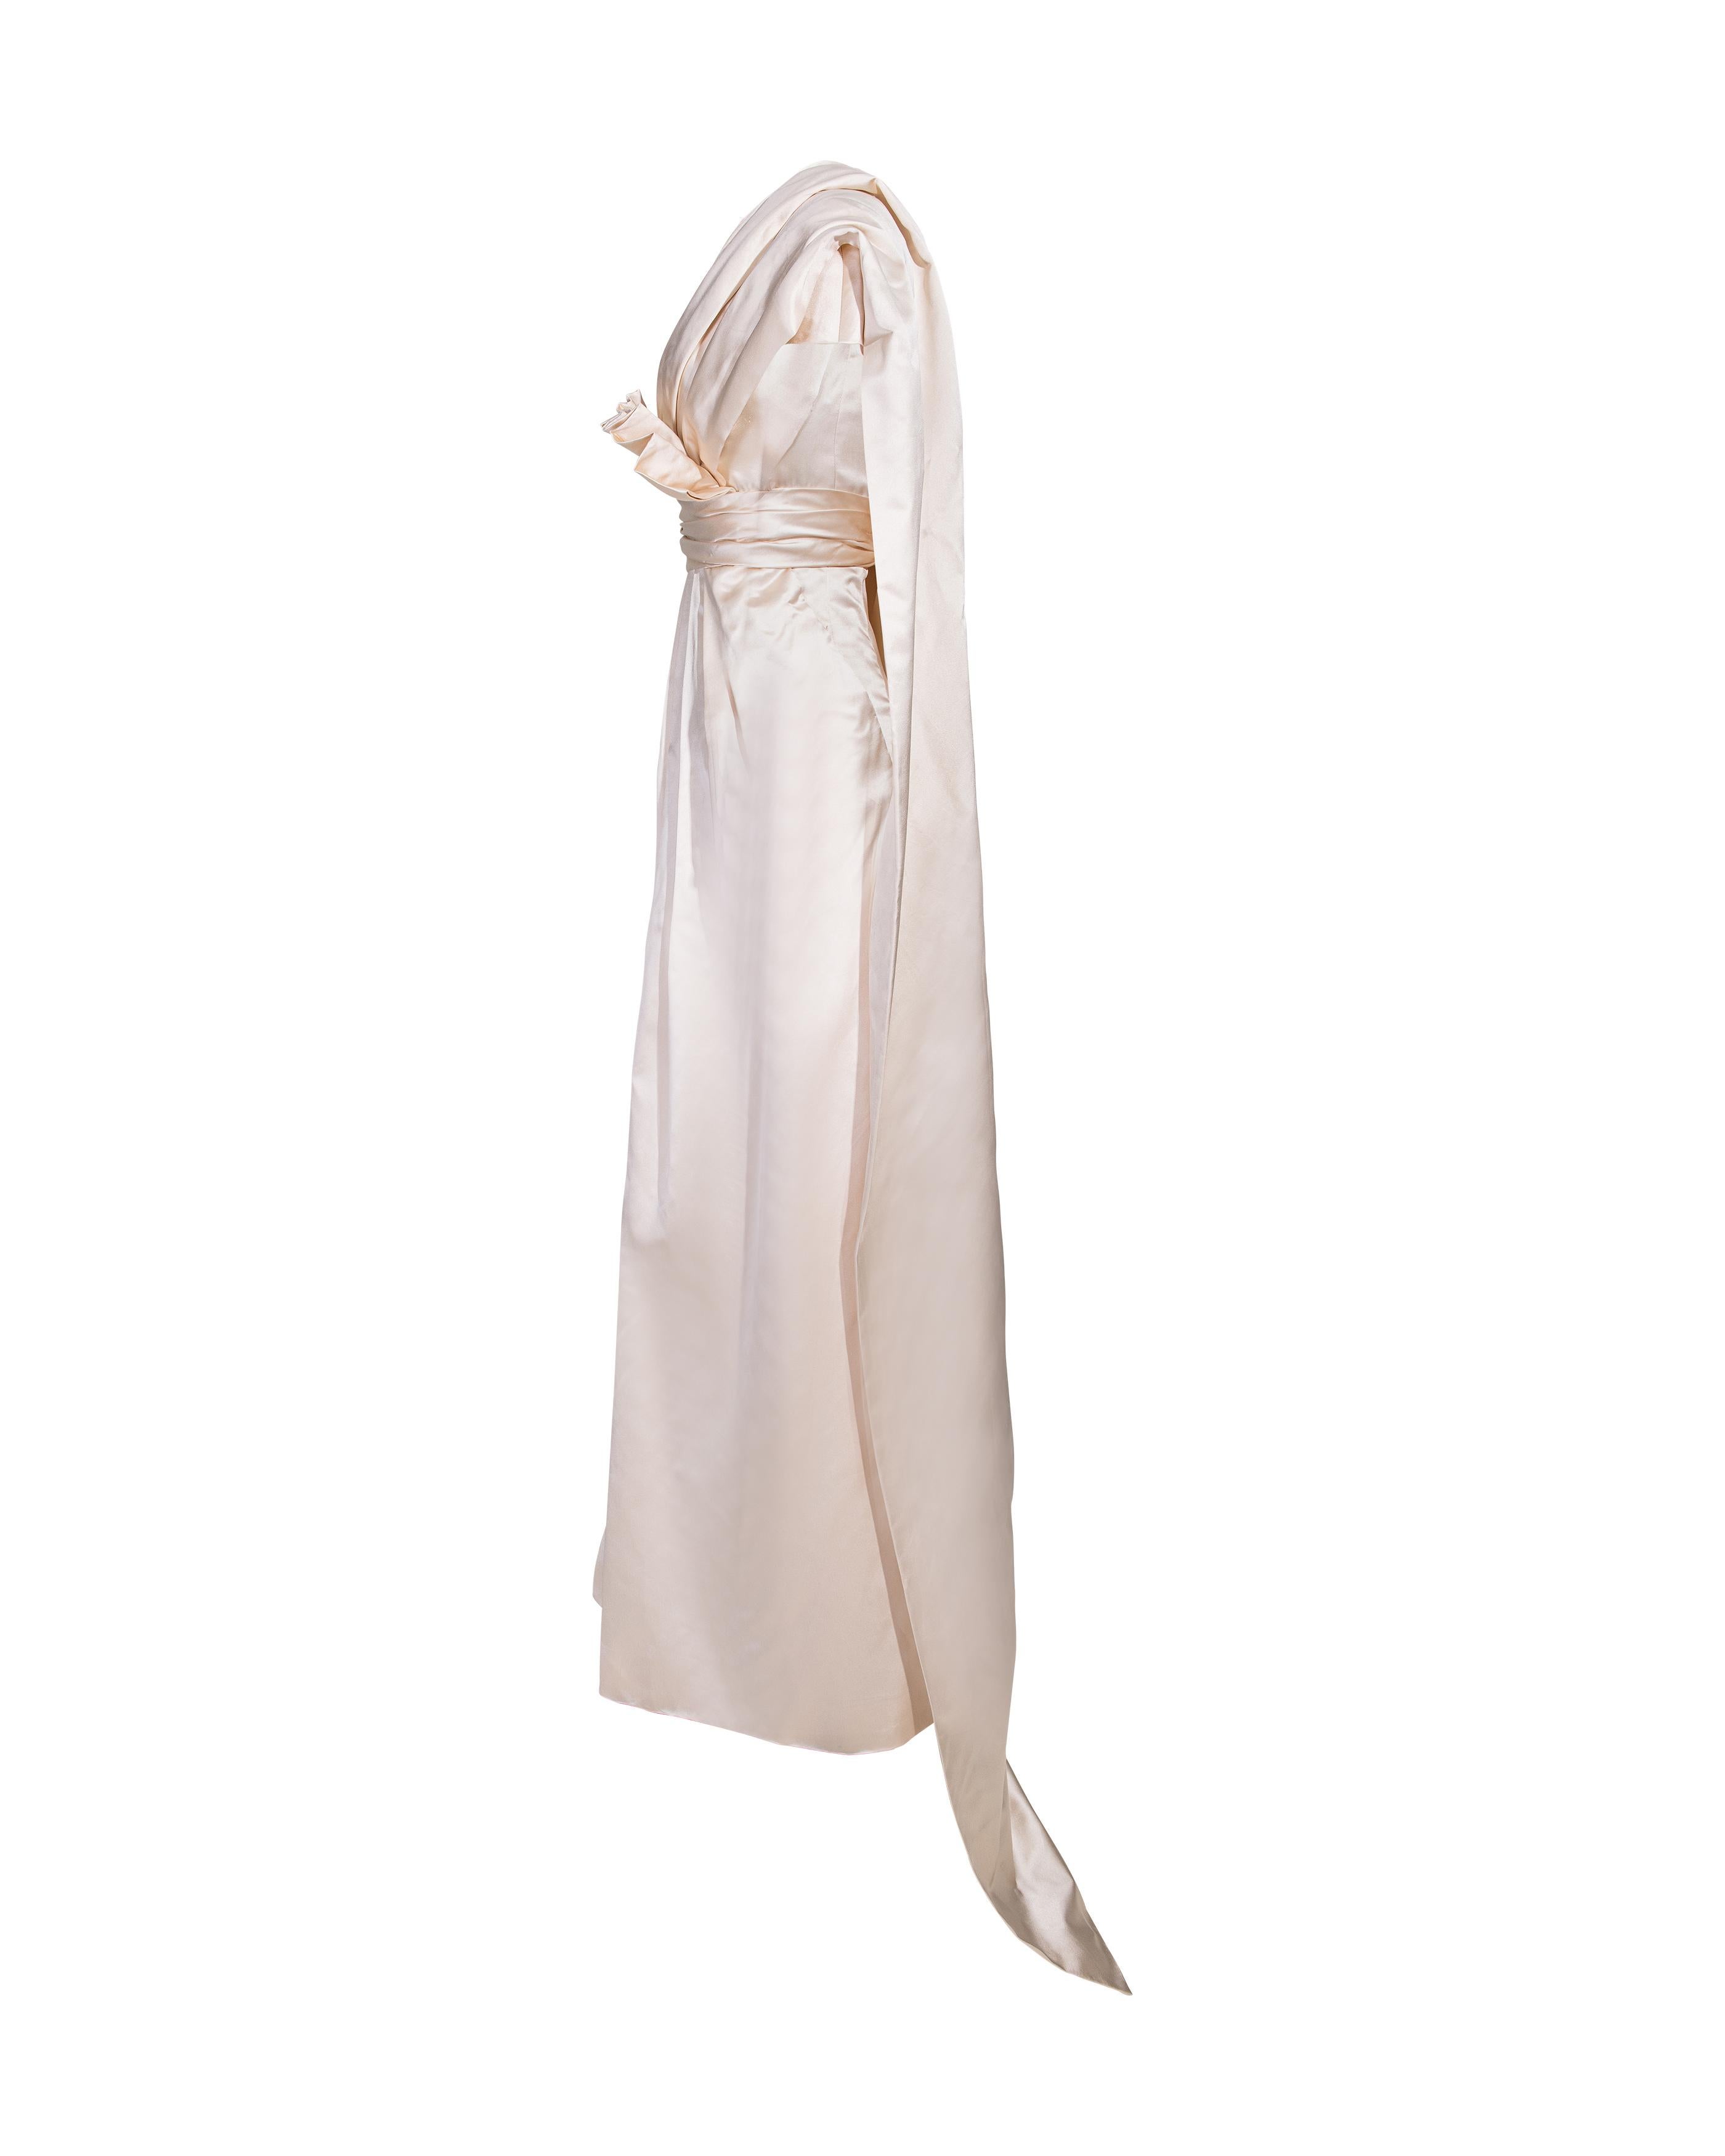 S/S 1955 Christian Dior (Attributed) Short Sleeve Ecru Satin Gown with Sash 1